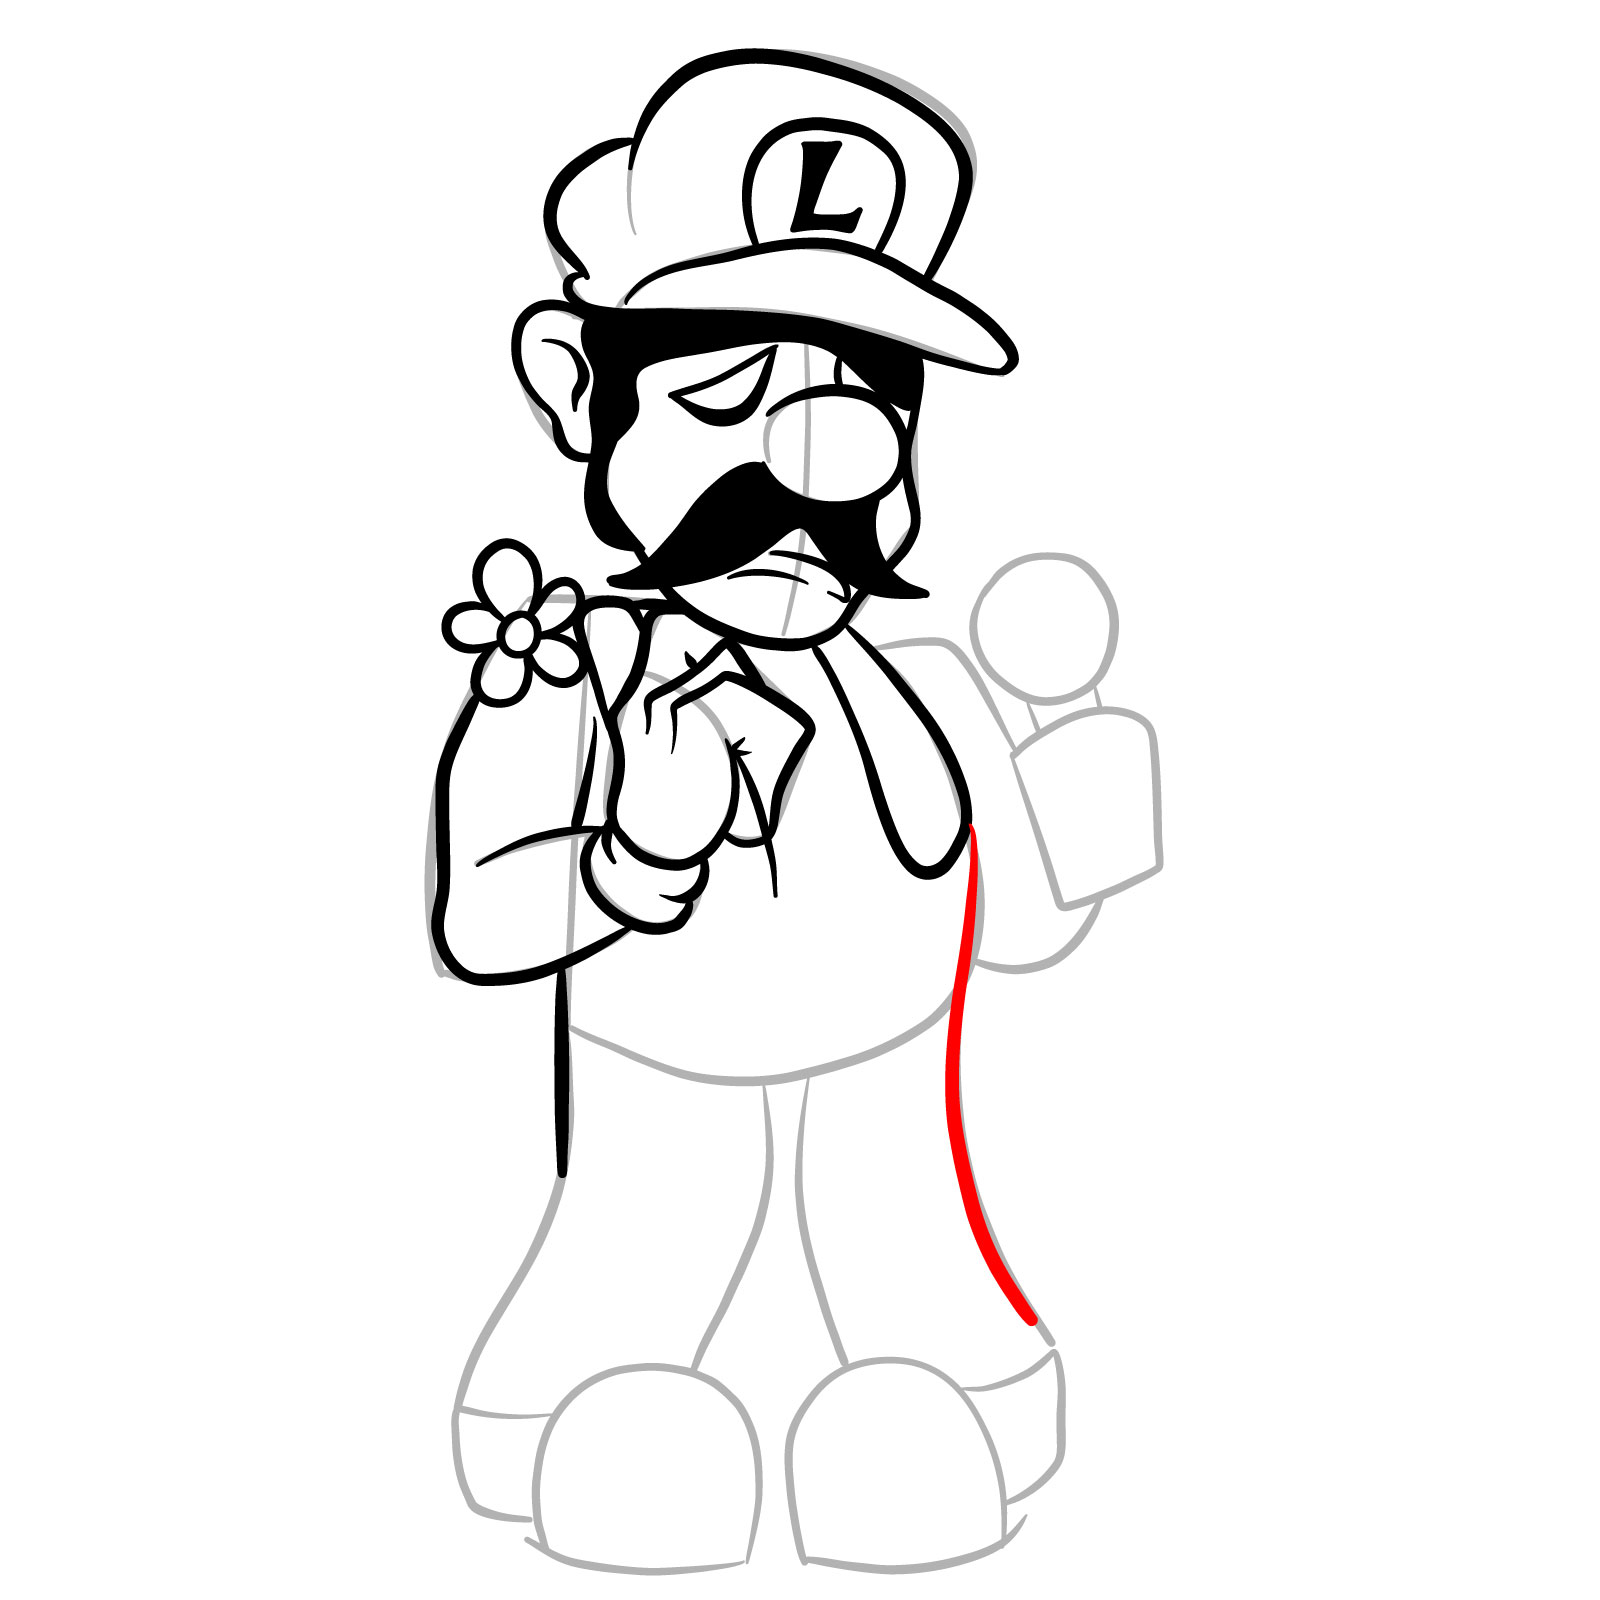 How to draw Beta Luigi from FNF - step 22